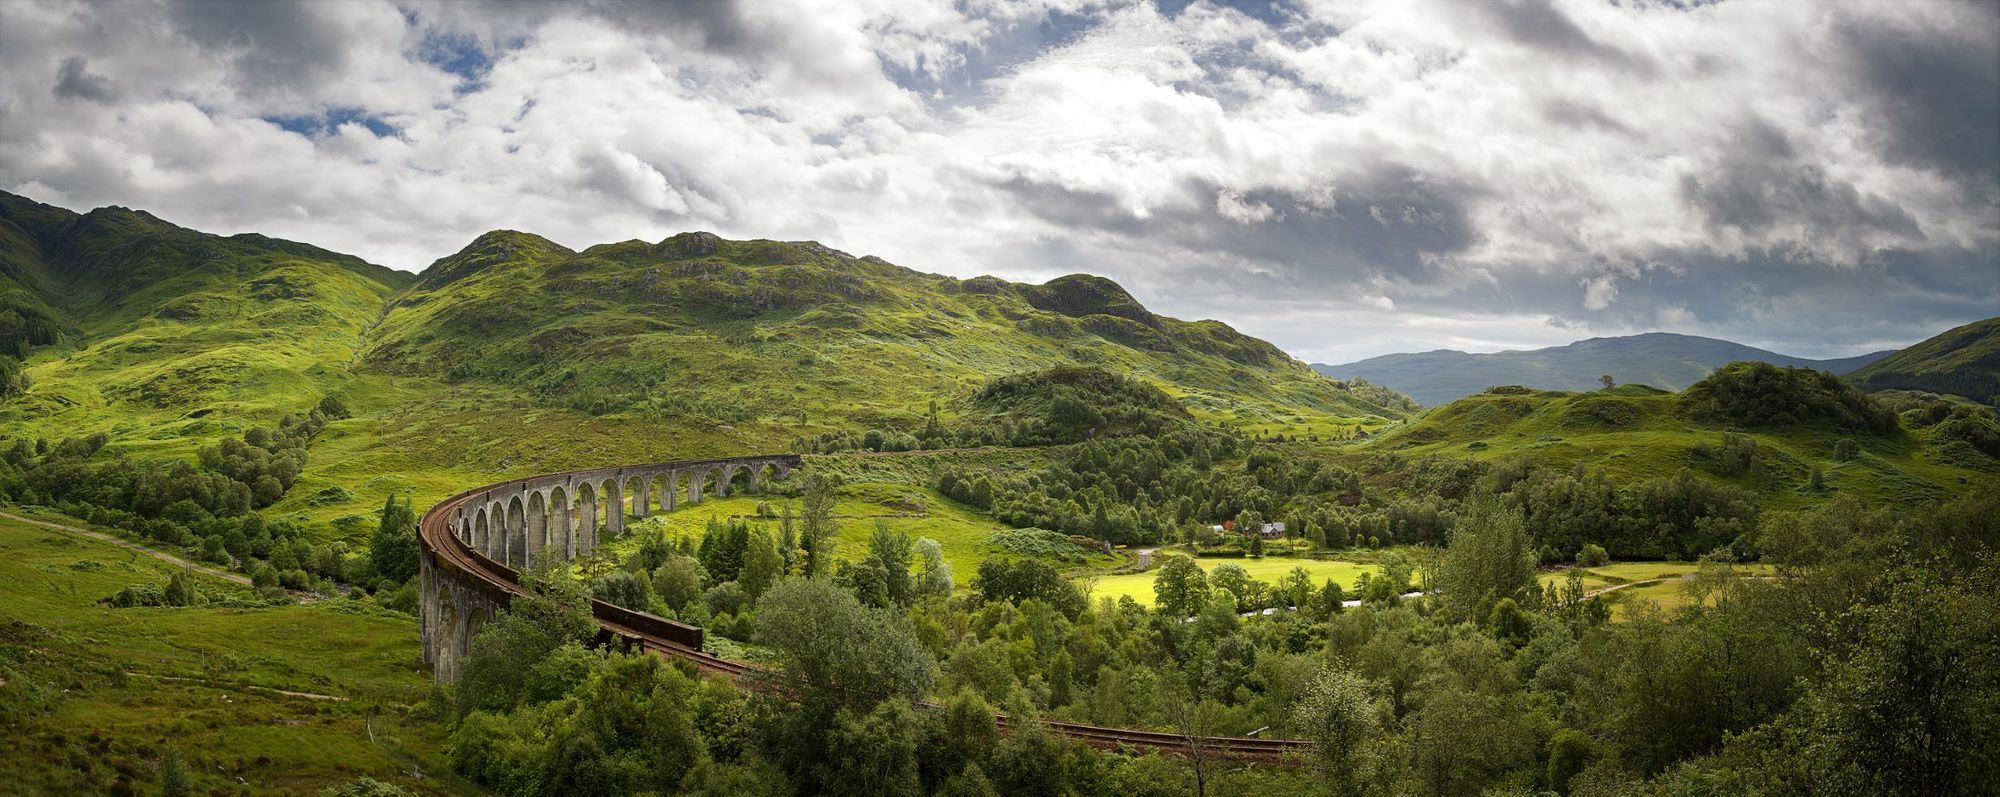 The famous Glenfinnan Viaduct, featured in Harry Potter, on the West Highland Line in Scotland. Photo: Getty